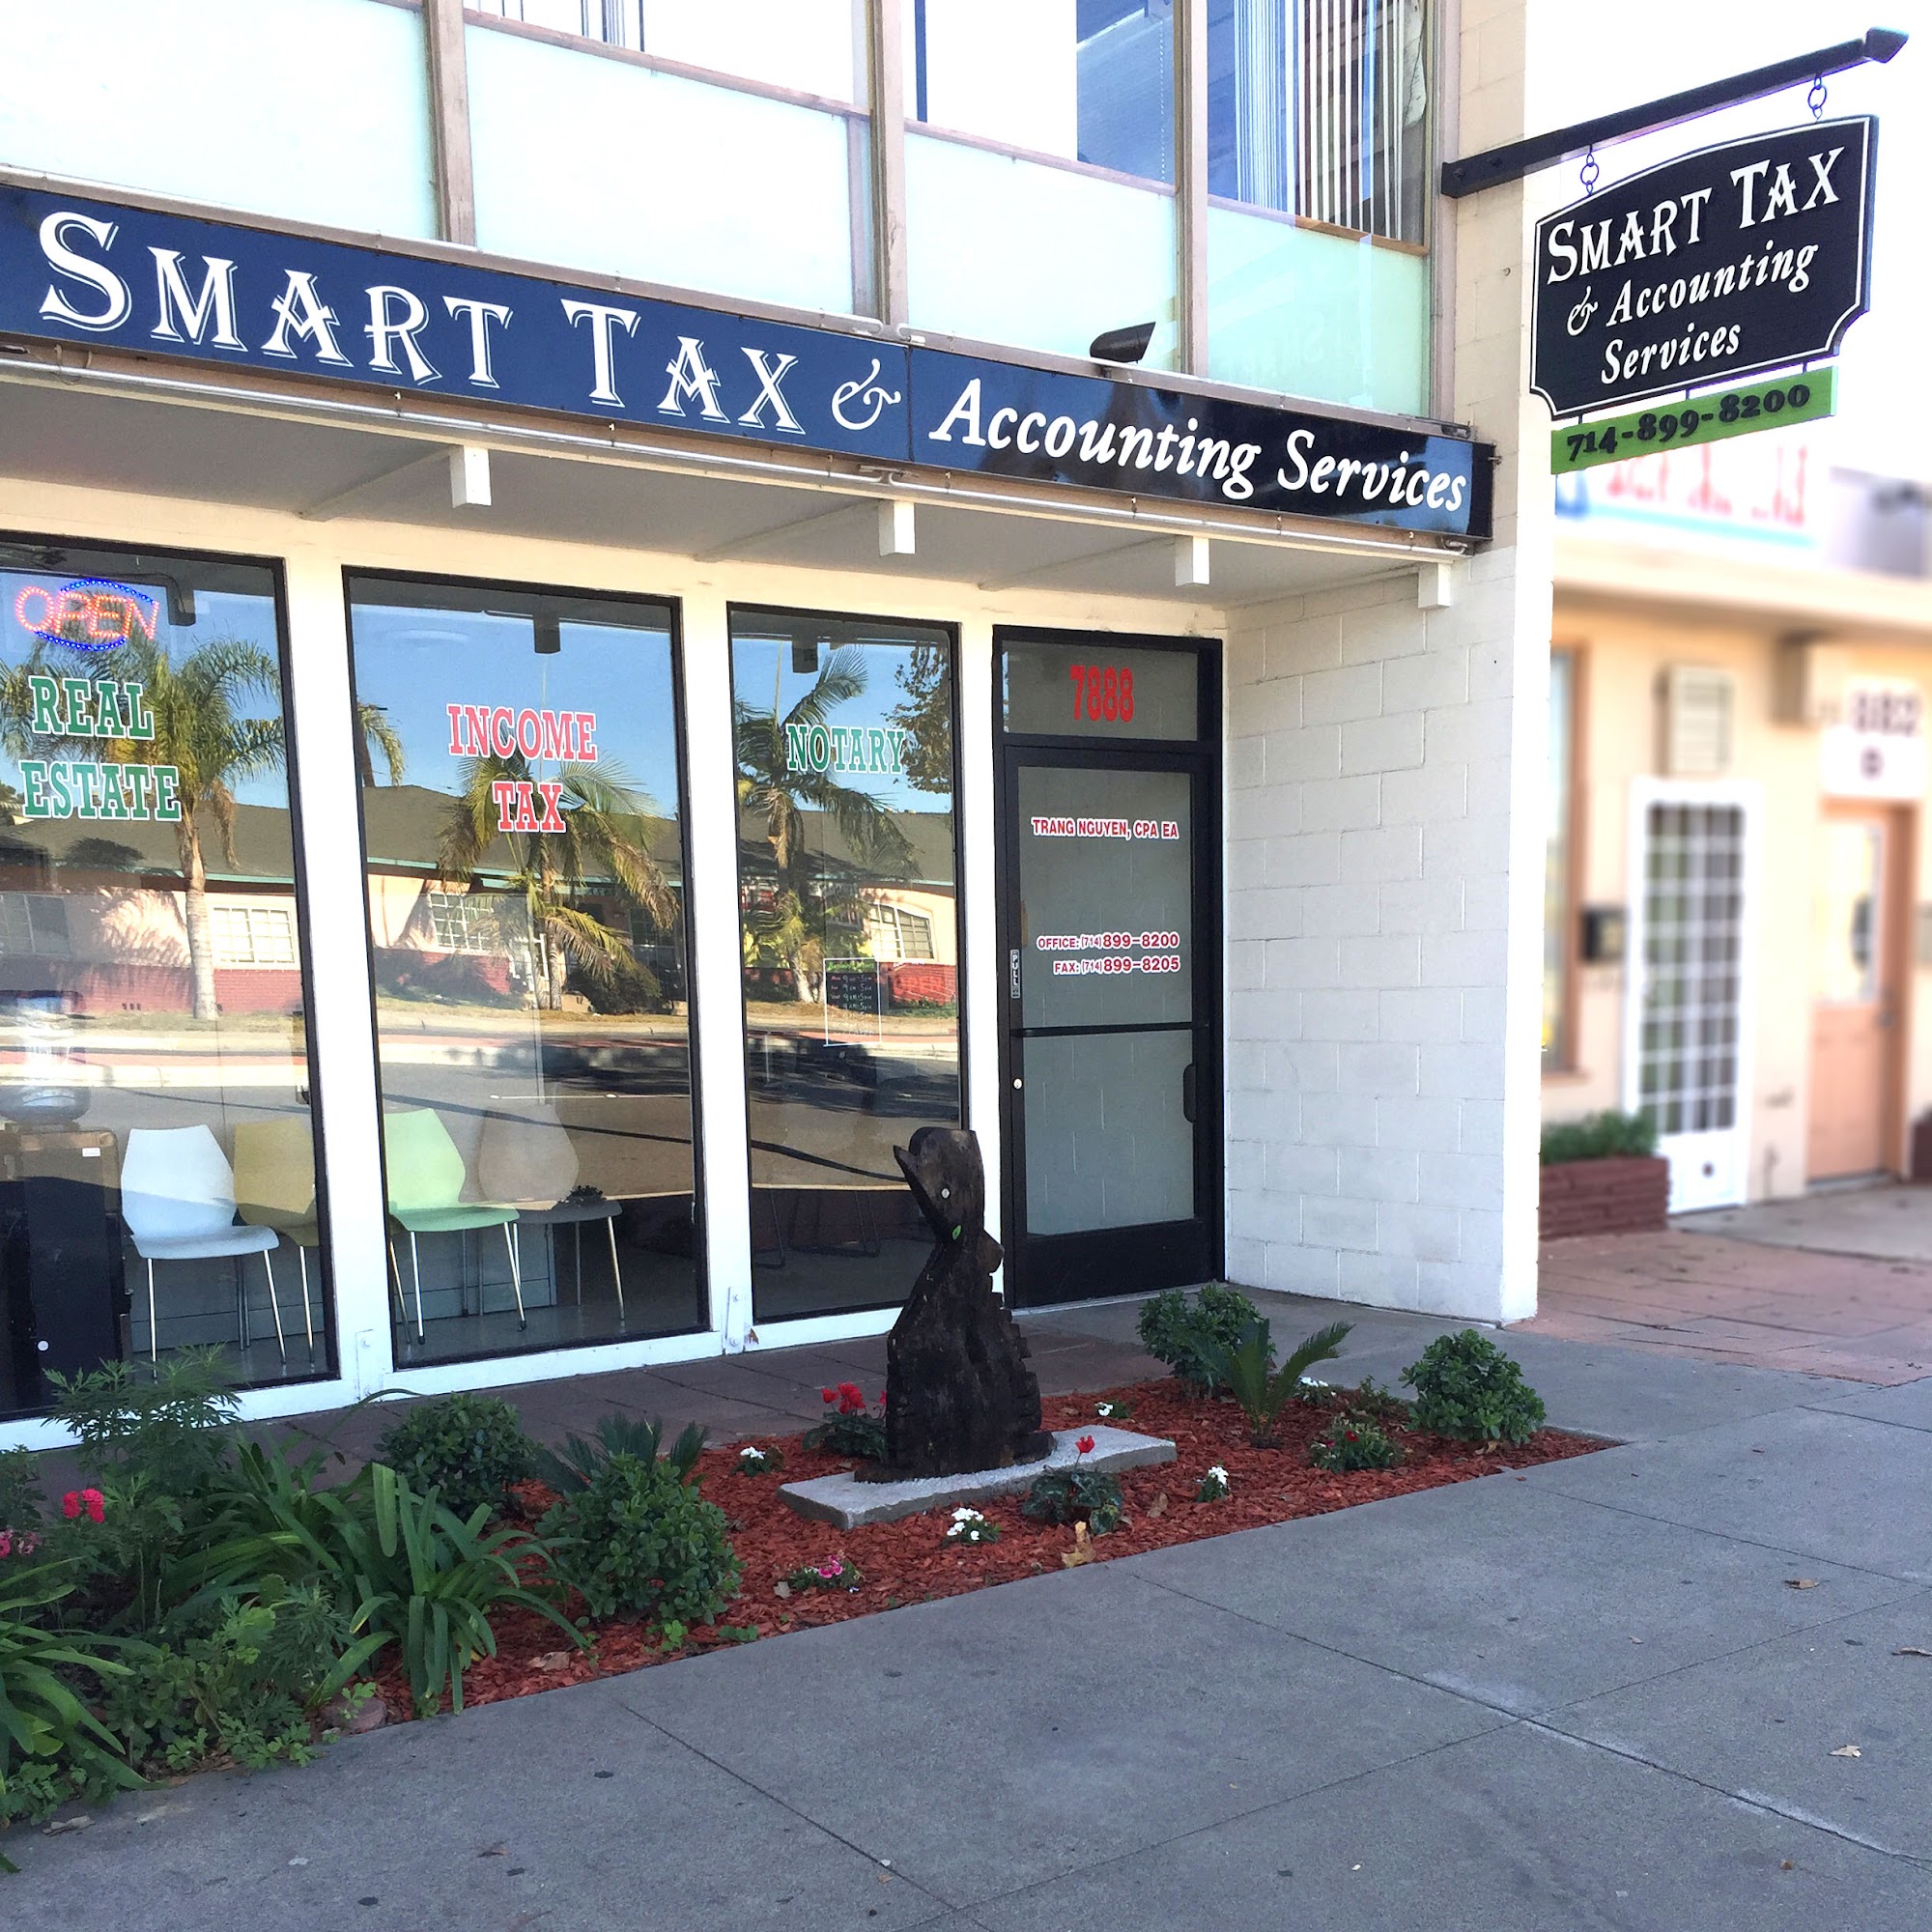 Smart Tax & Accounting Services